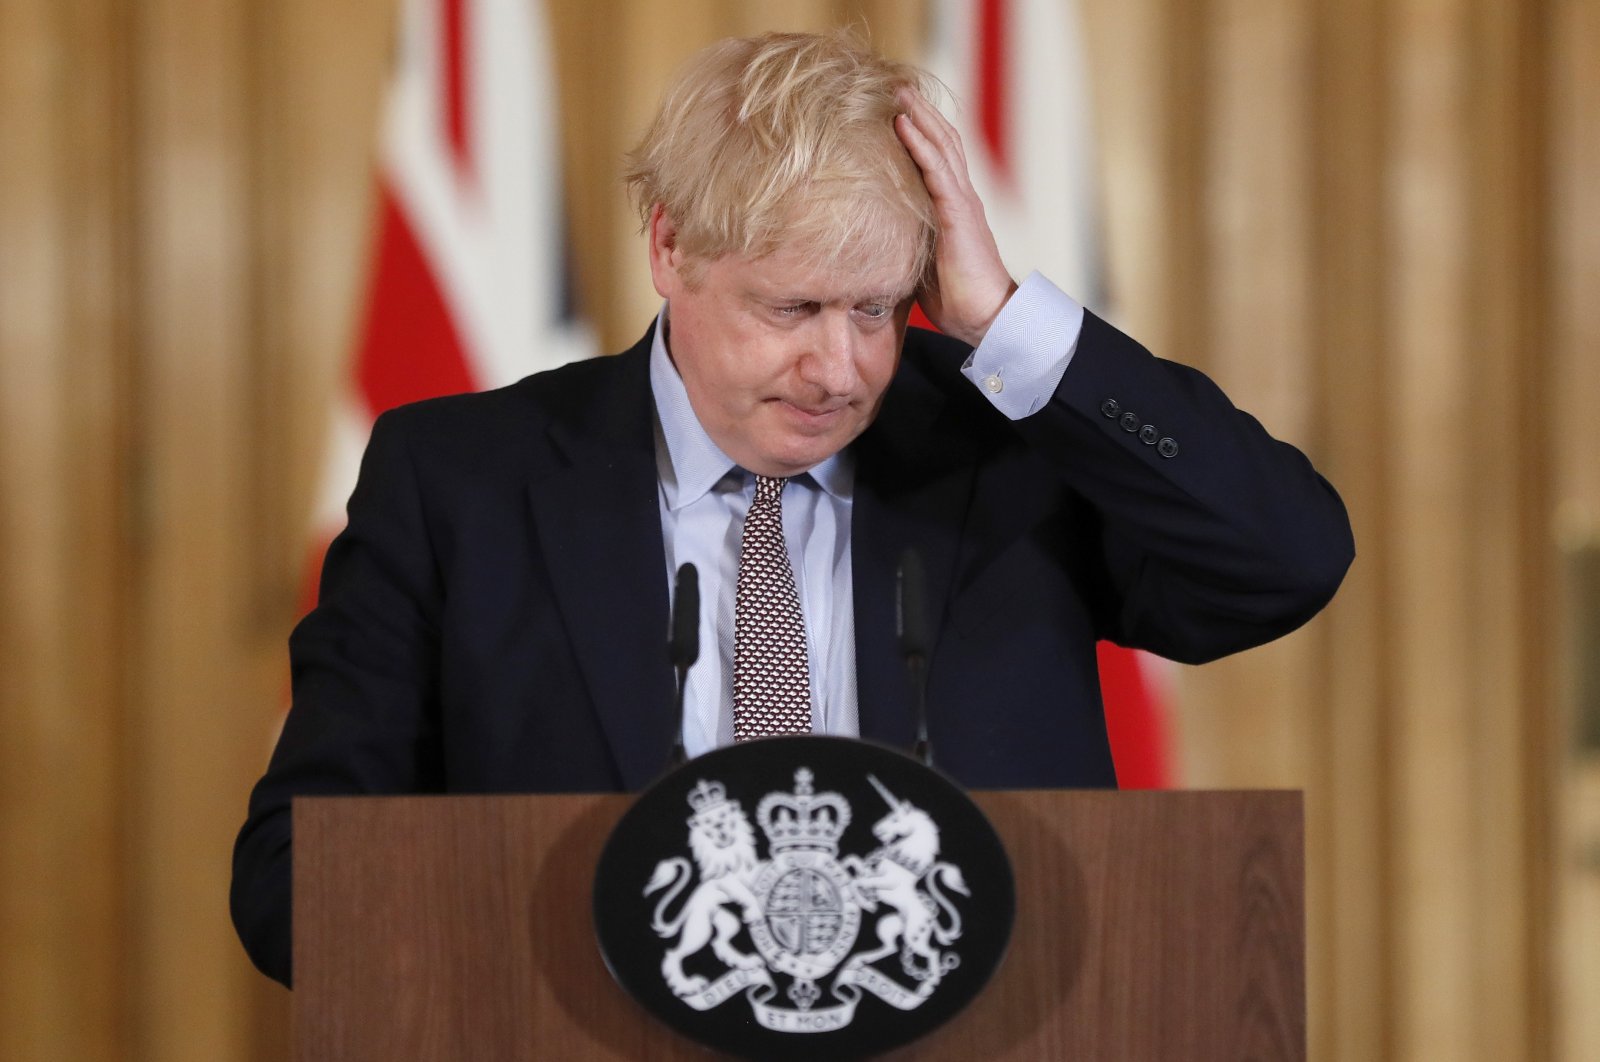 Britain's Prime Minister Boris Johnson reacts during a press conference at Downing Street on the government's coronavirus action plan in London, the U.K., March 3, 2020. (AP Photo)